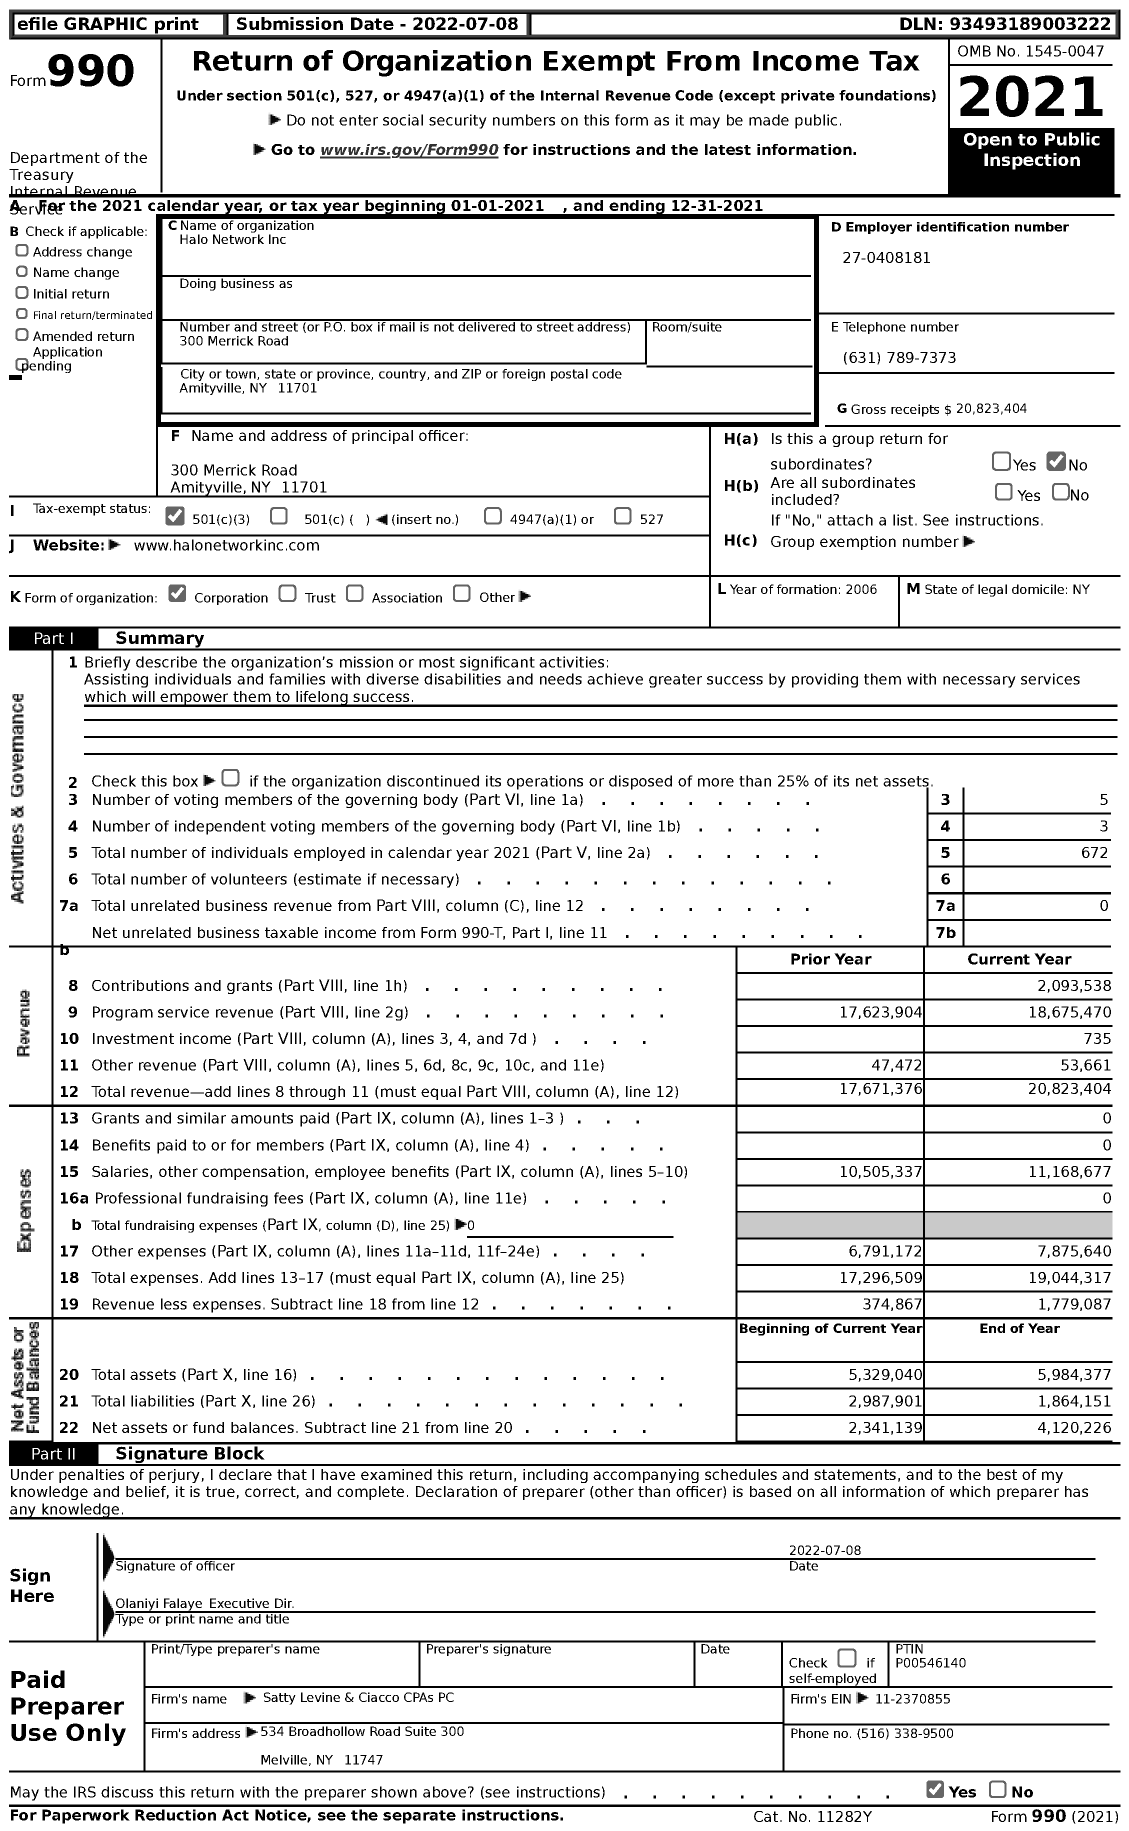 Image of first page of 2021 Form 990 for Halo Network